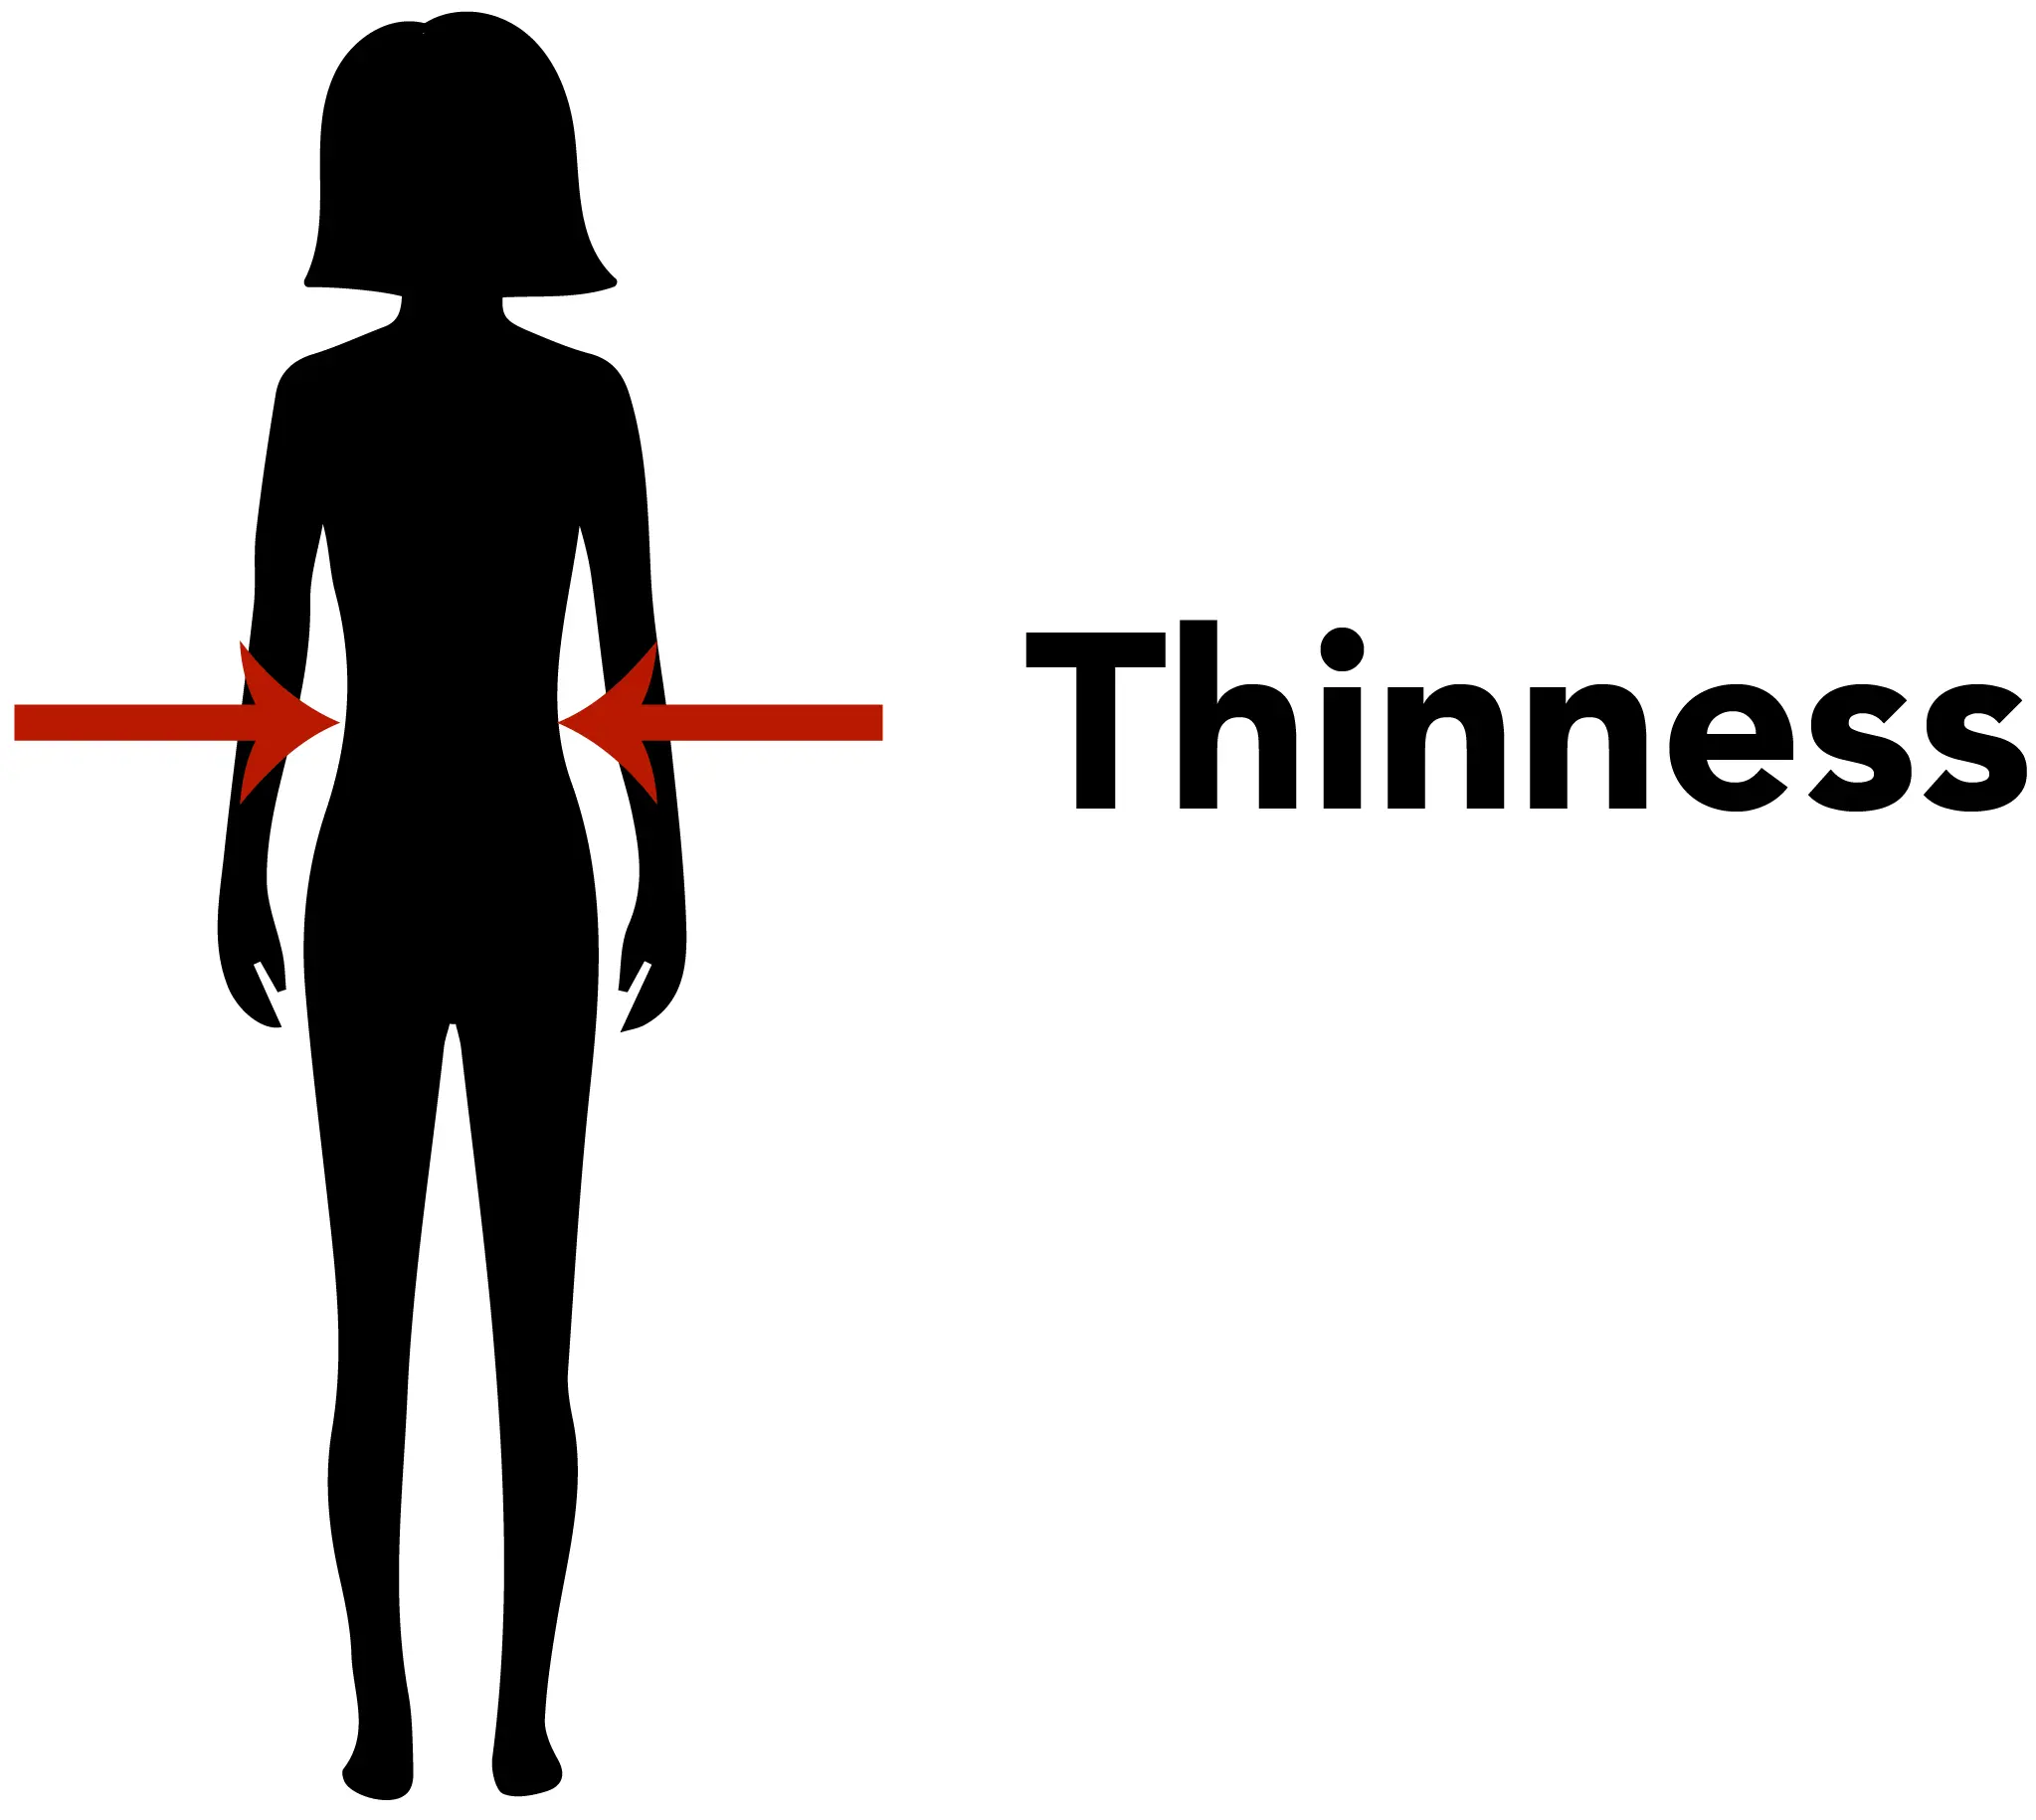 This study examined genetic predisposition to thinness rather than obesity.